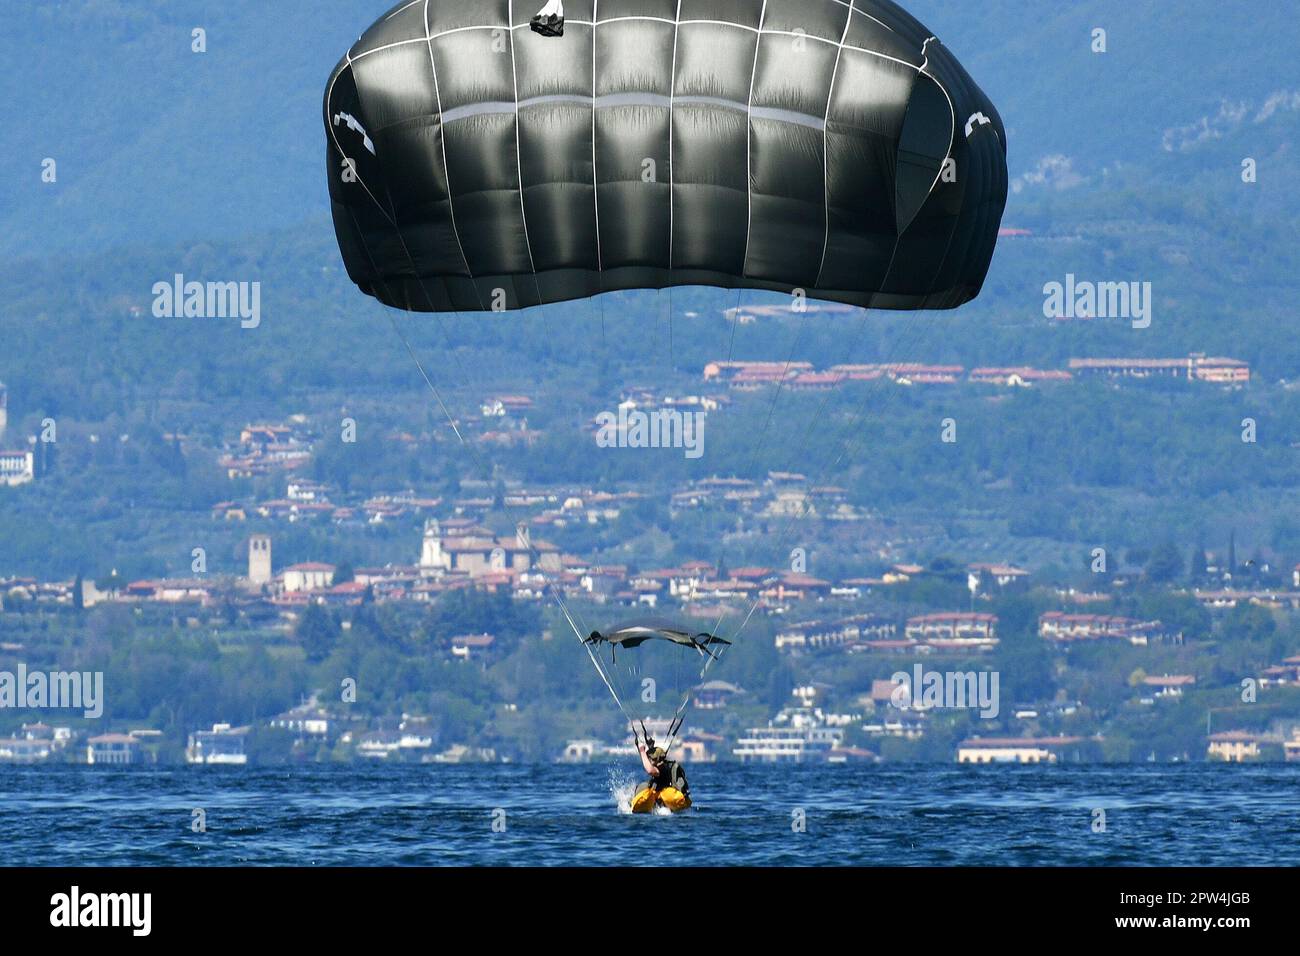 A U. S. Army Paratrooper assigned to 173rd Airborne Brigade, conducts a water jump after into Lake Garda near Pacengo, Italy, Apr. 26, 2023. The 173rd Airborne Brigade is the U.S. Army Contingency Response Force in Europe, capable of projecting ready forces anywhere in the U.S. European, Africa or Central Commands' areas of responsibility. (U.S. Army photo by Paolo Bovo) Stock Photo